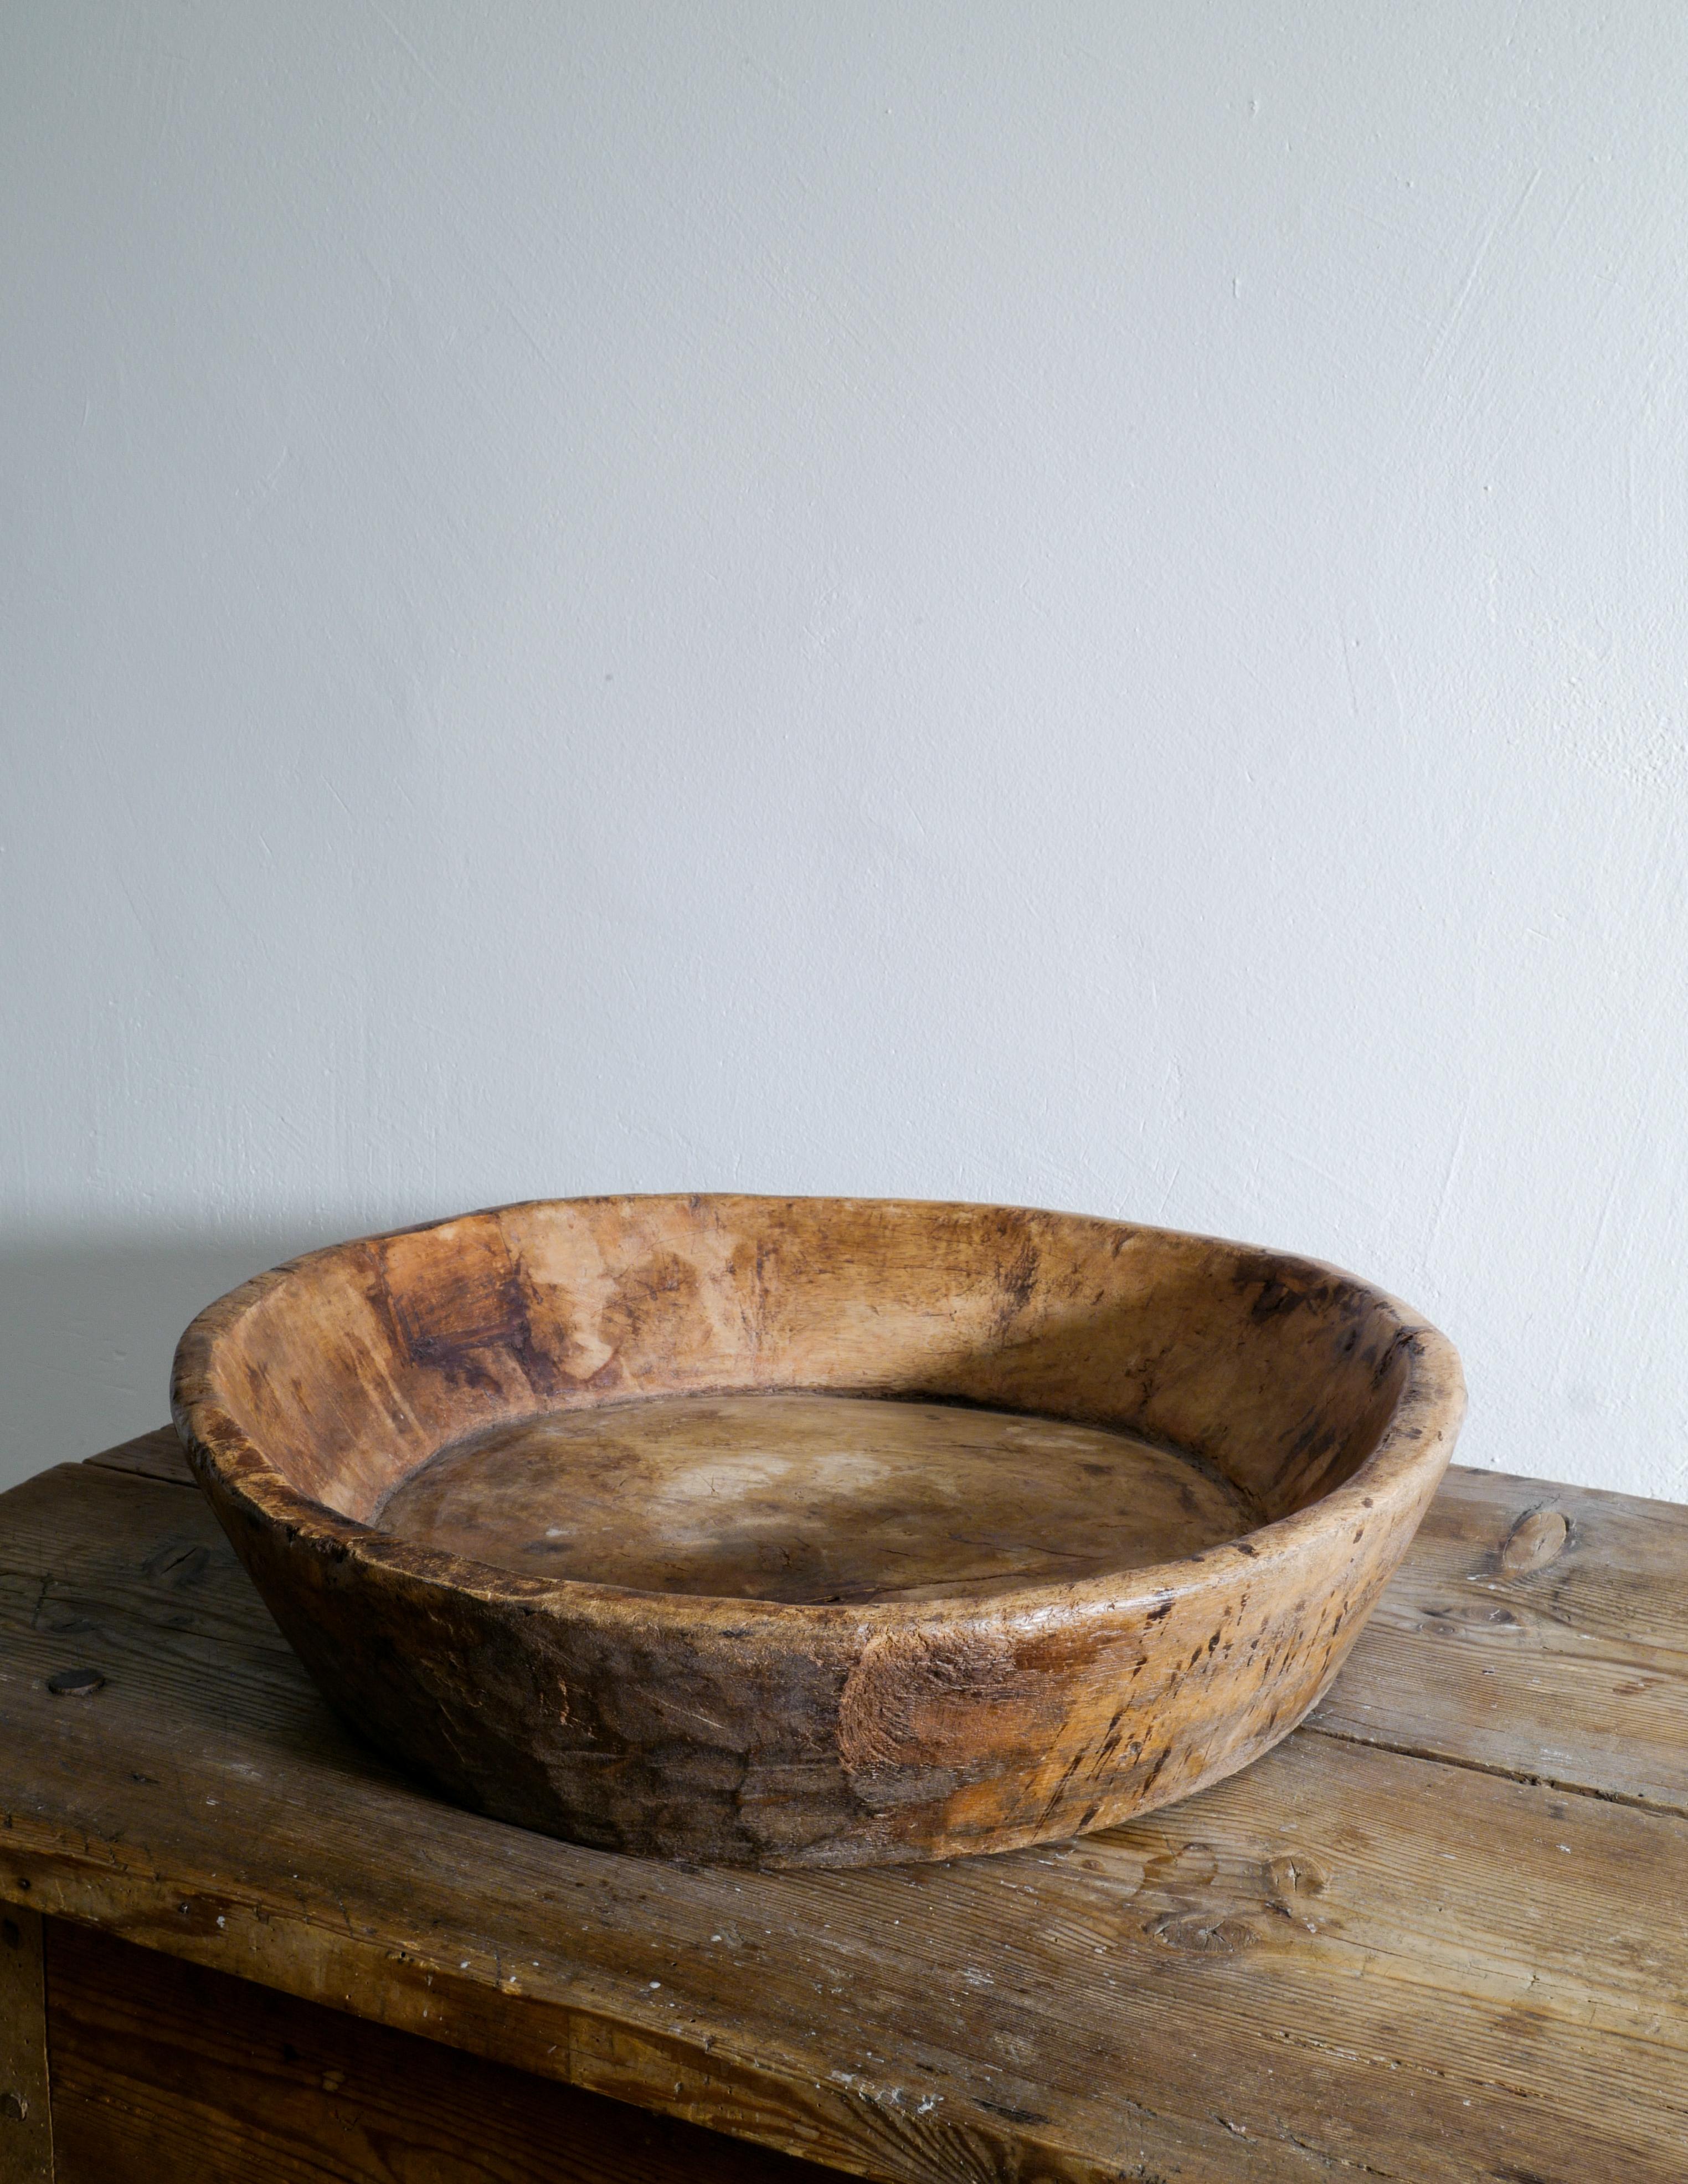 Rare and beautiful wooden bowl in a wabi sabi style produced in Sweden during the late 1800s. In good vintage condition showing nice patina from use and age.